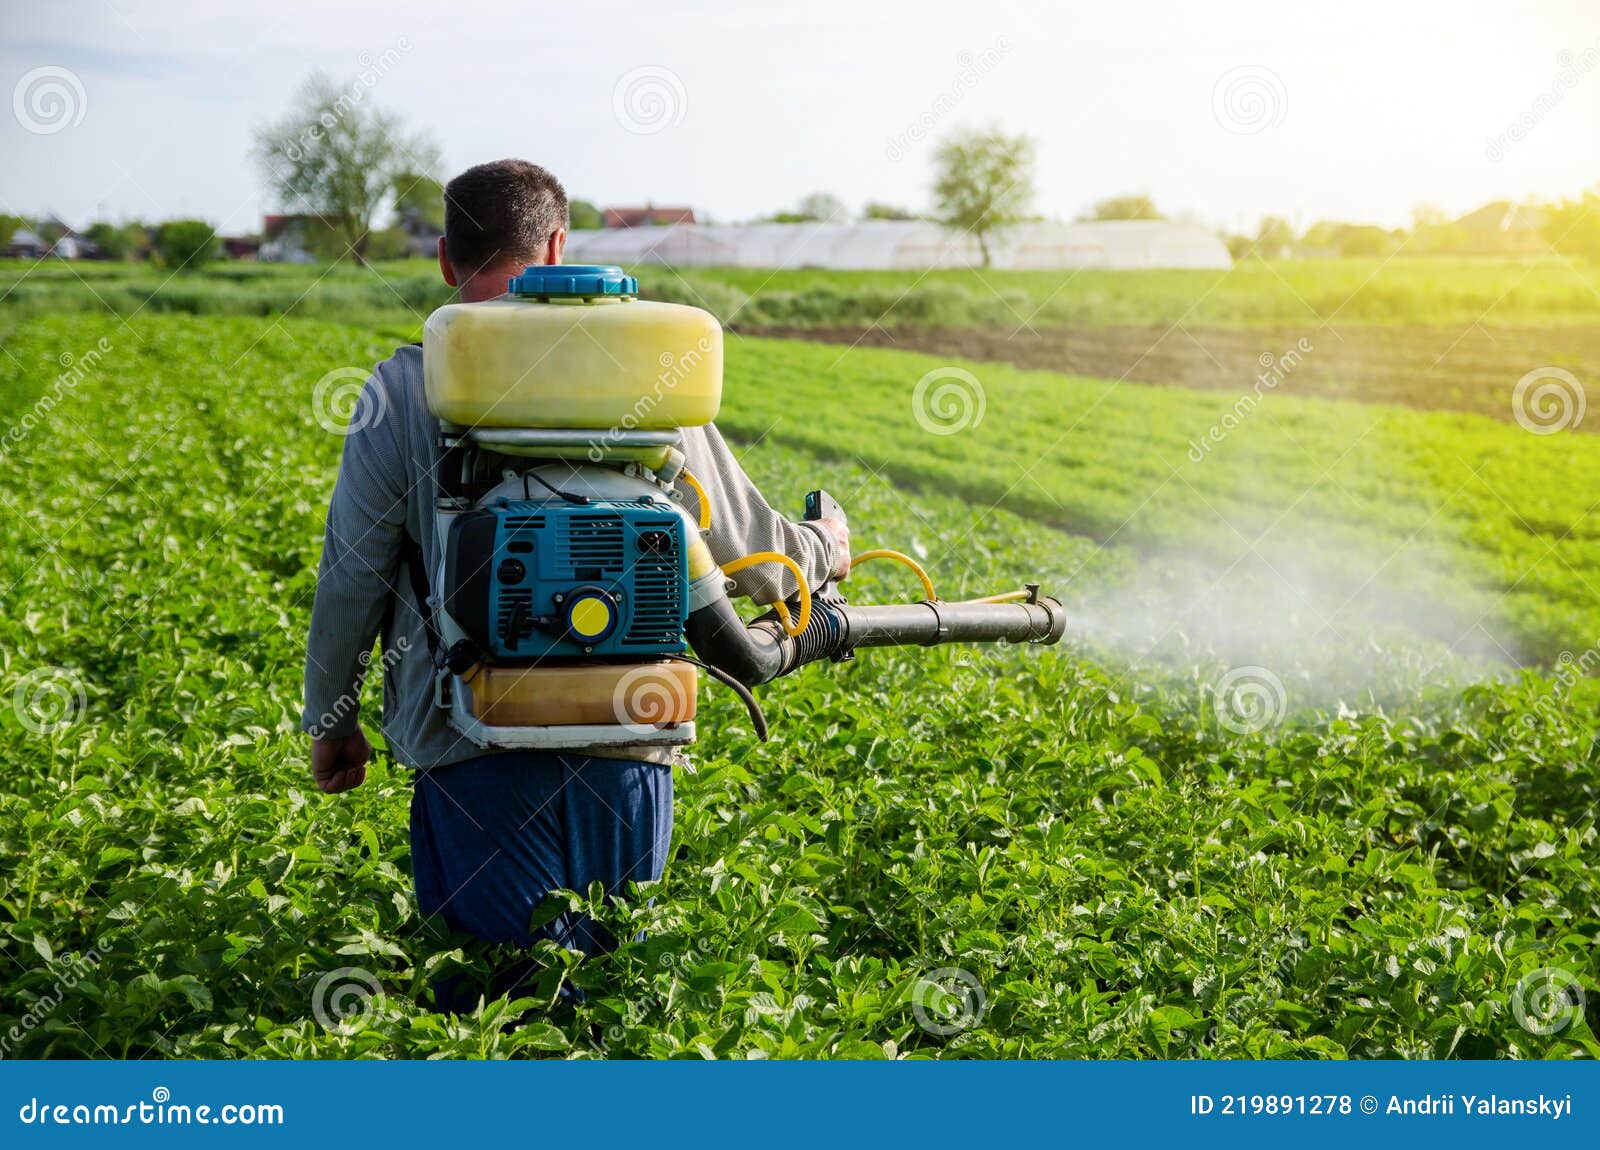 a farmer with a mist fogger sprayer sprays fungicide and pesticide on potato bushes. effective crop protection, environmental